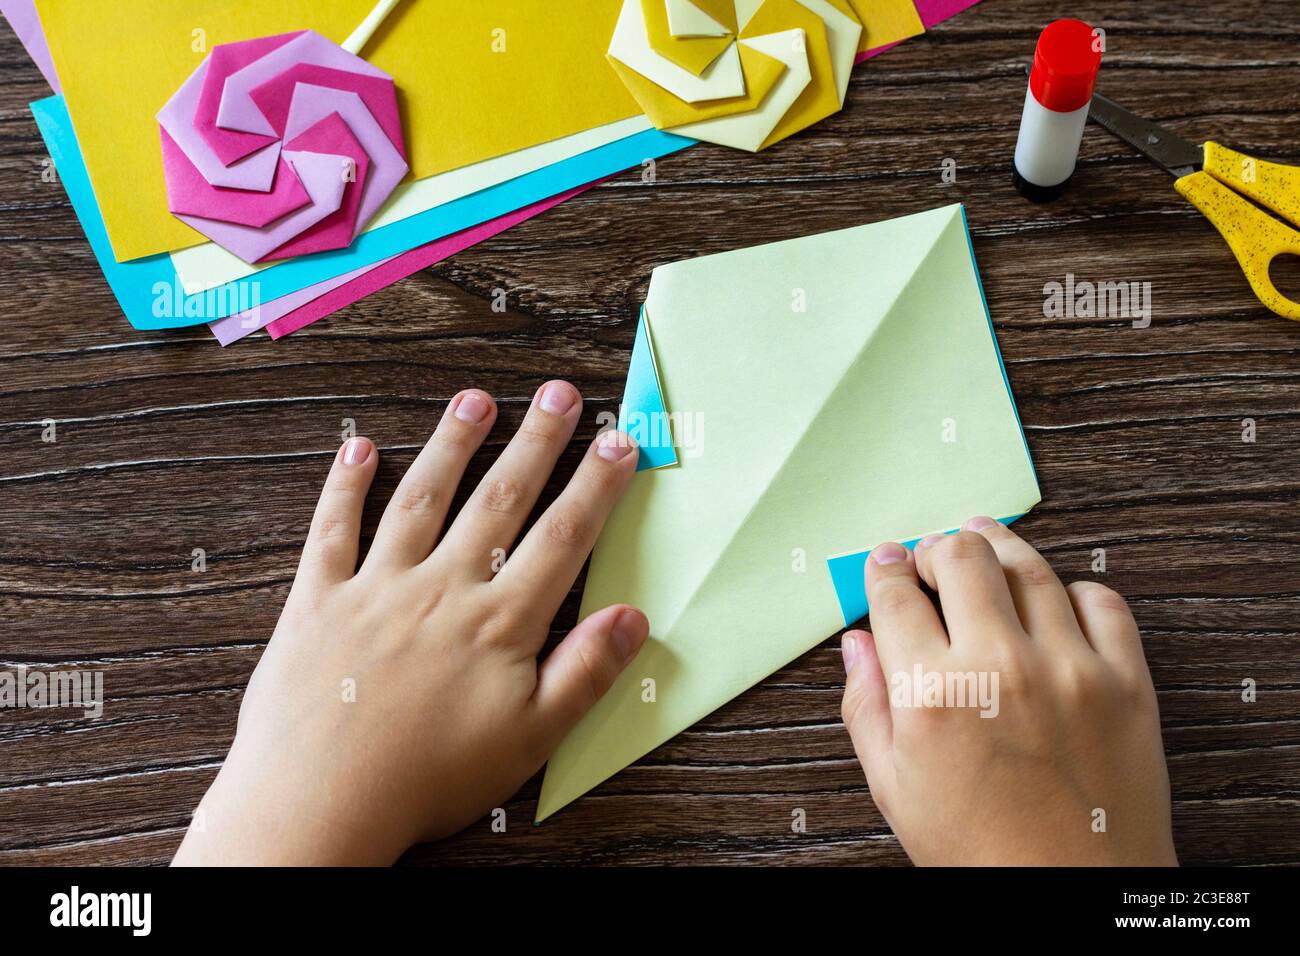 Make a Silly Folded Picture, Crafts for Kids